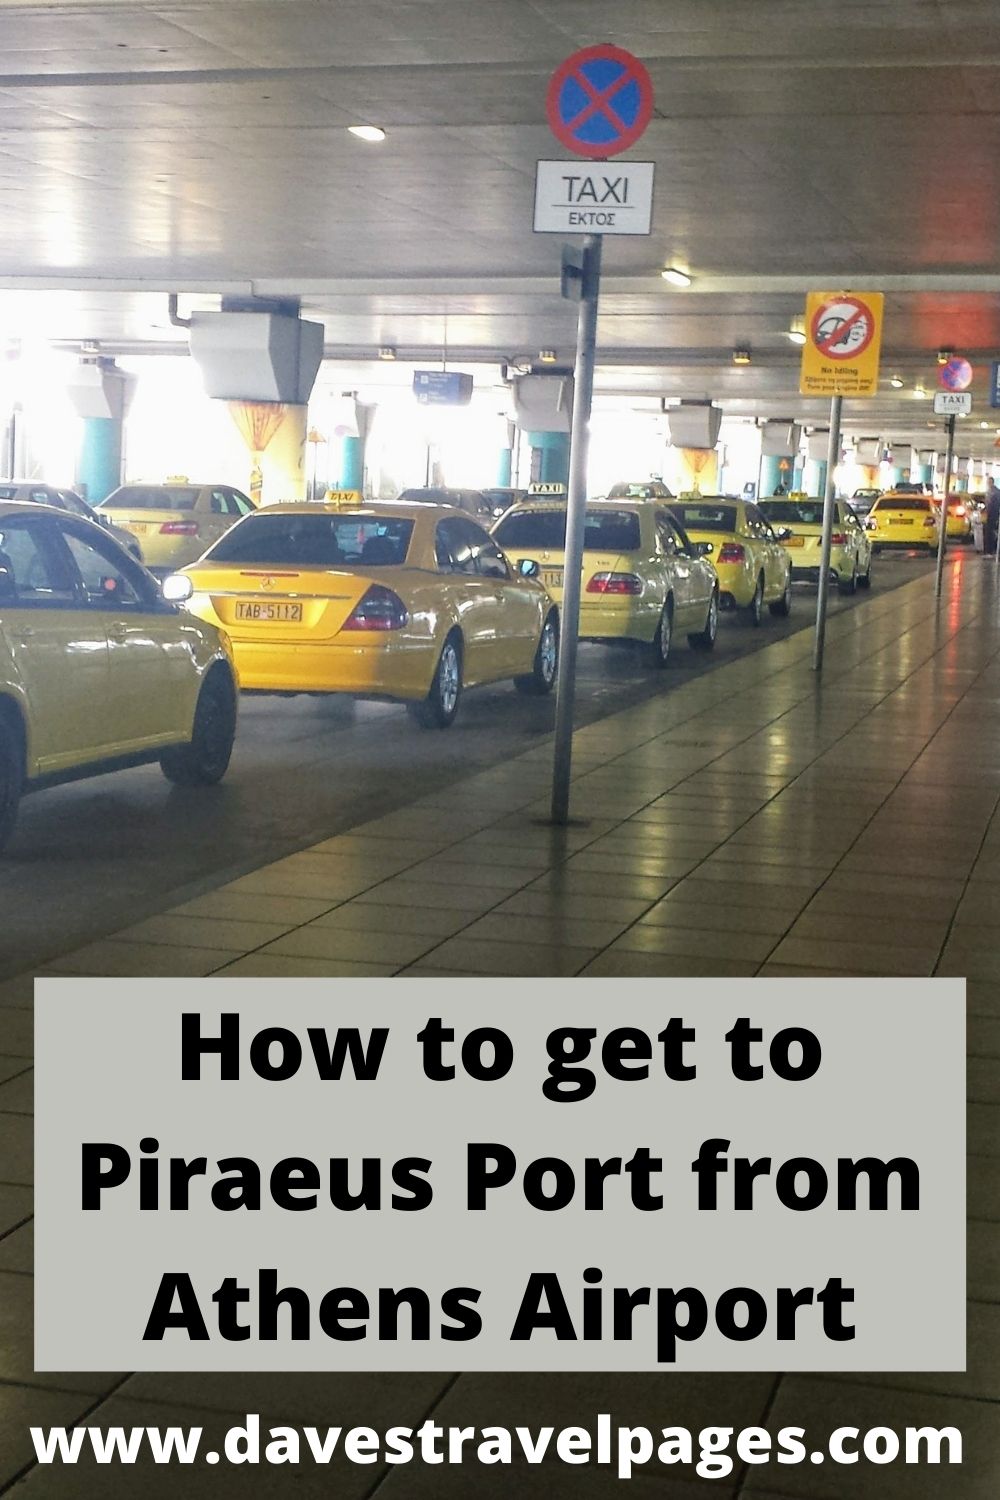 How to get to Piraeus Port from Athens Airport